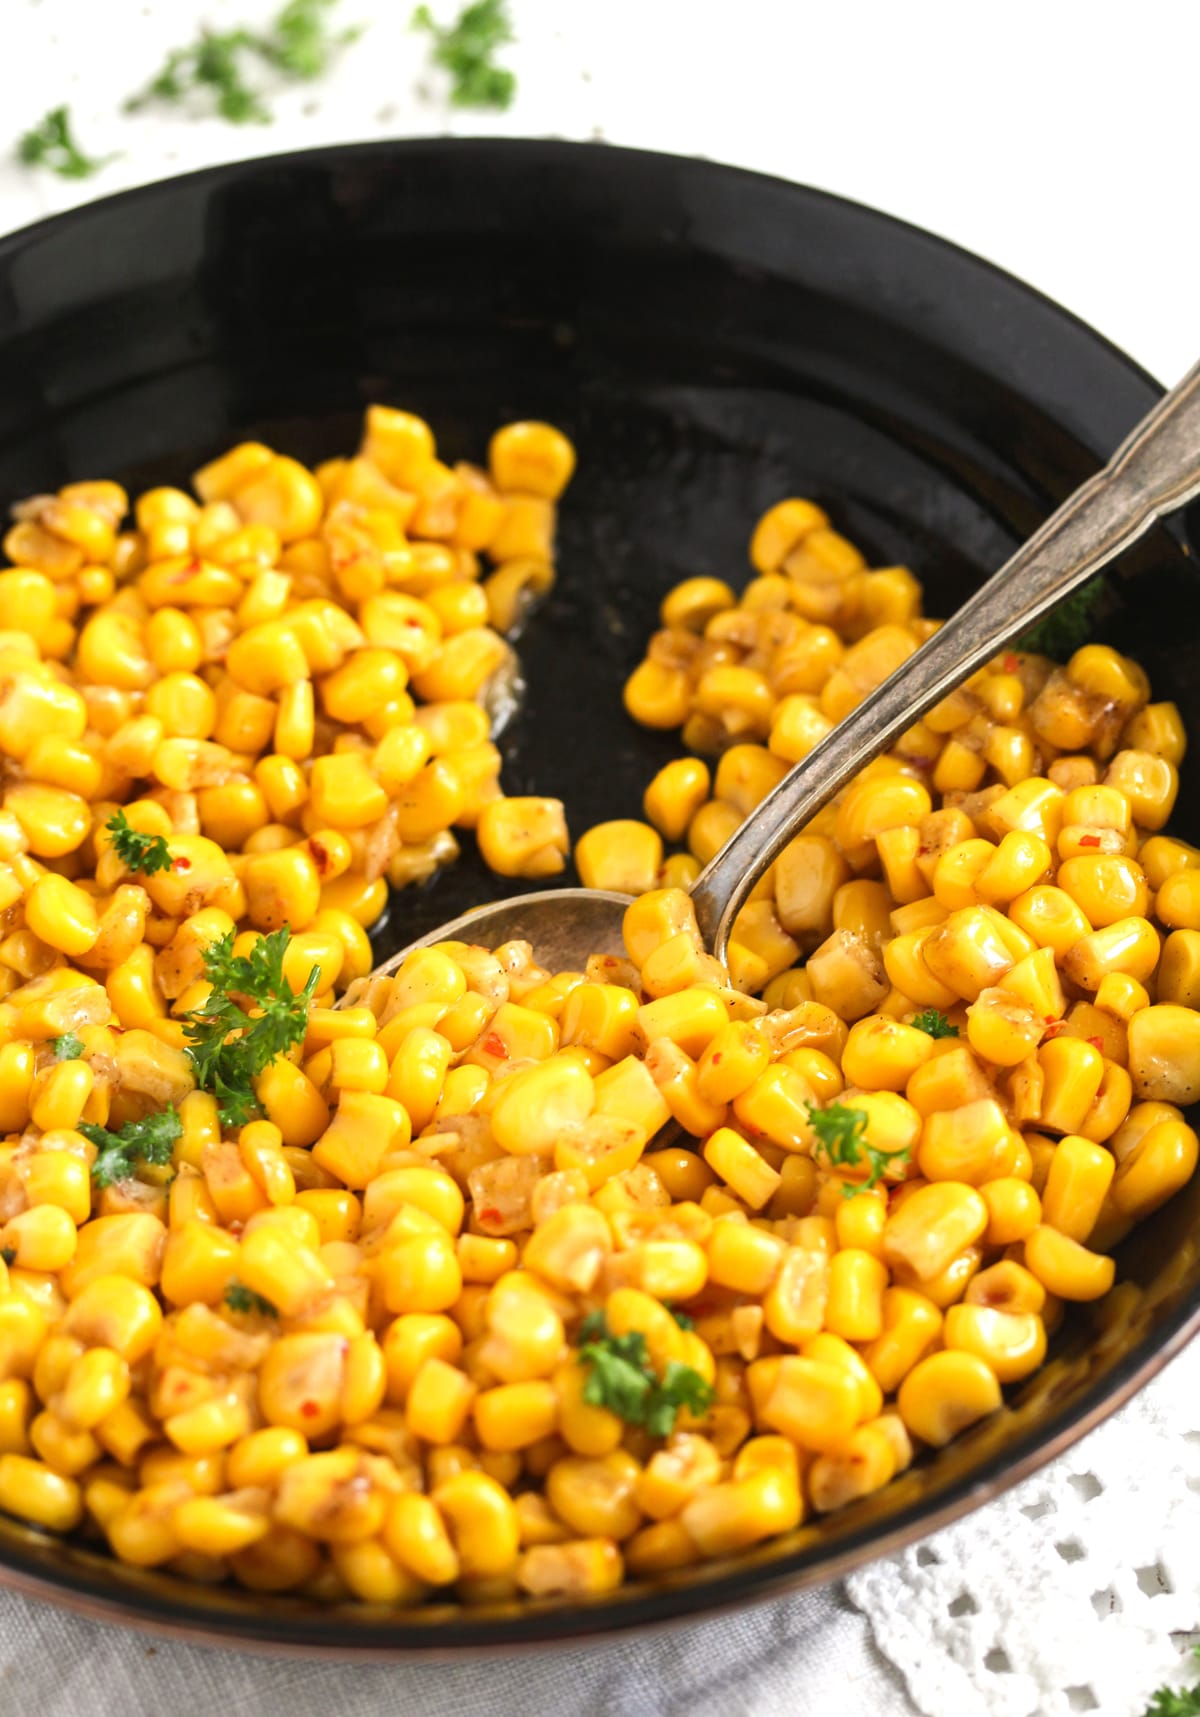 serving cooked corn kernels with a spoon.